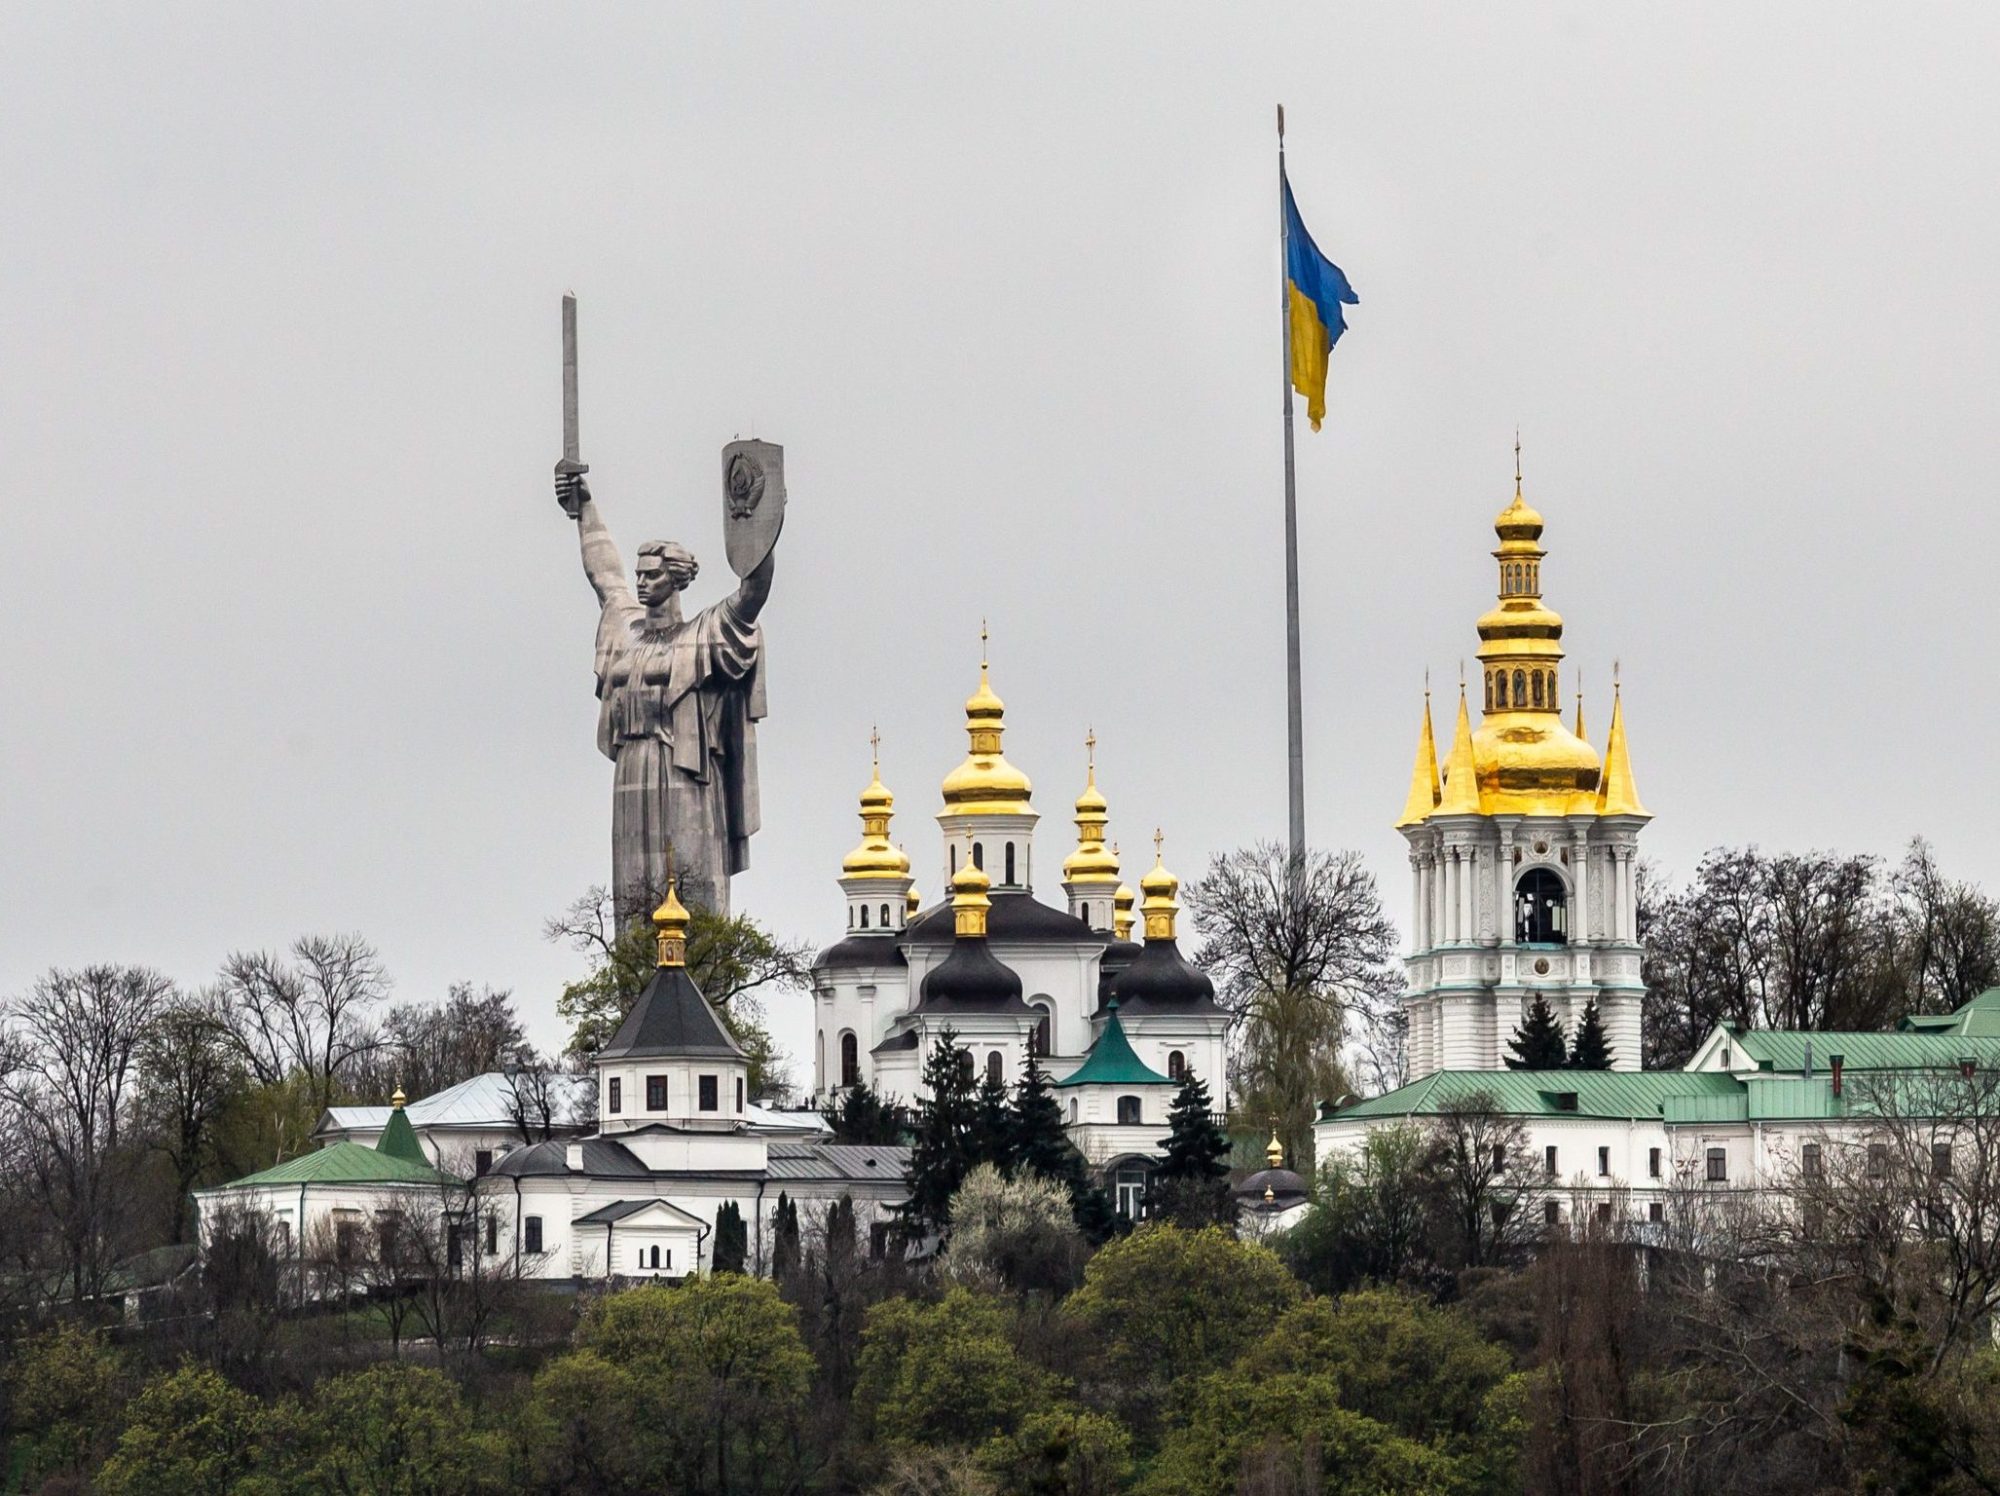 At øge Frank Worthley Mistillid Russia's invasion highlights the need to invest more in Ukrainian studies -  Atlantic Council